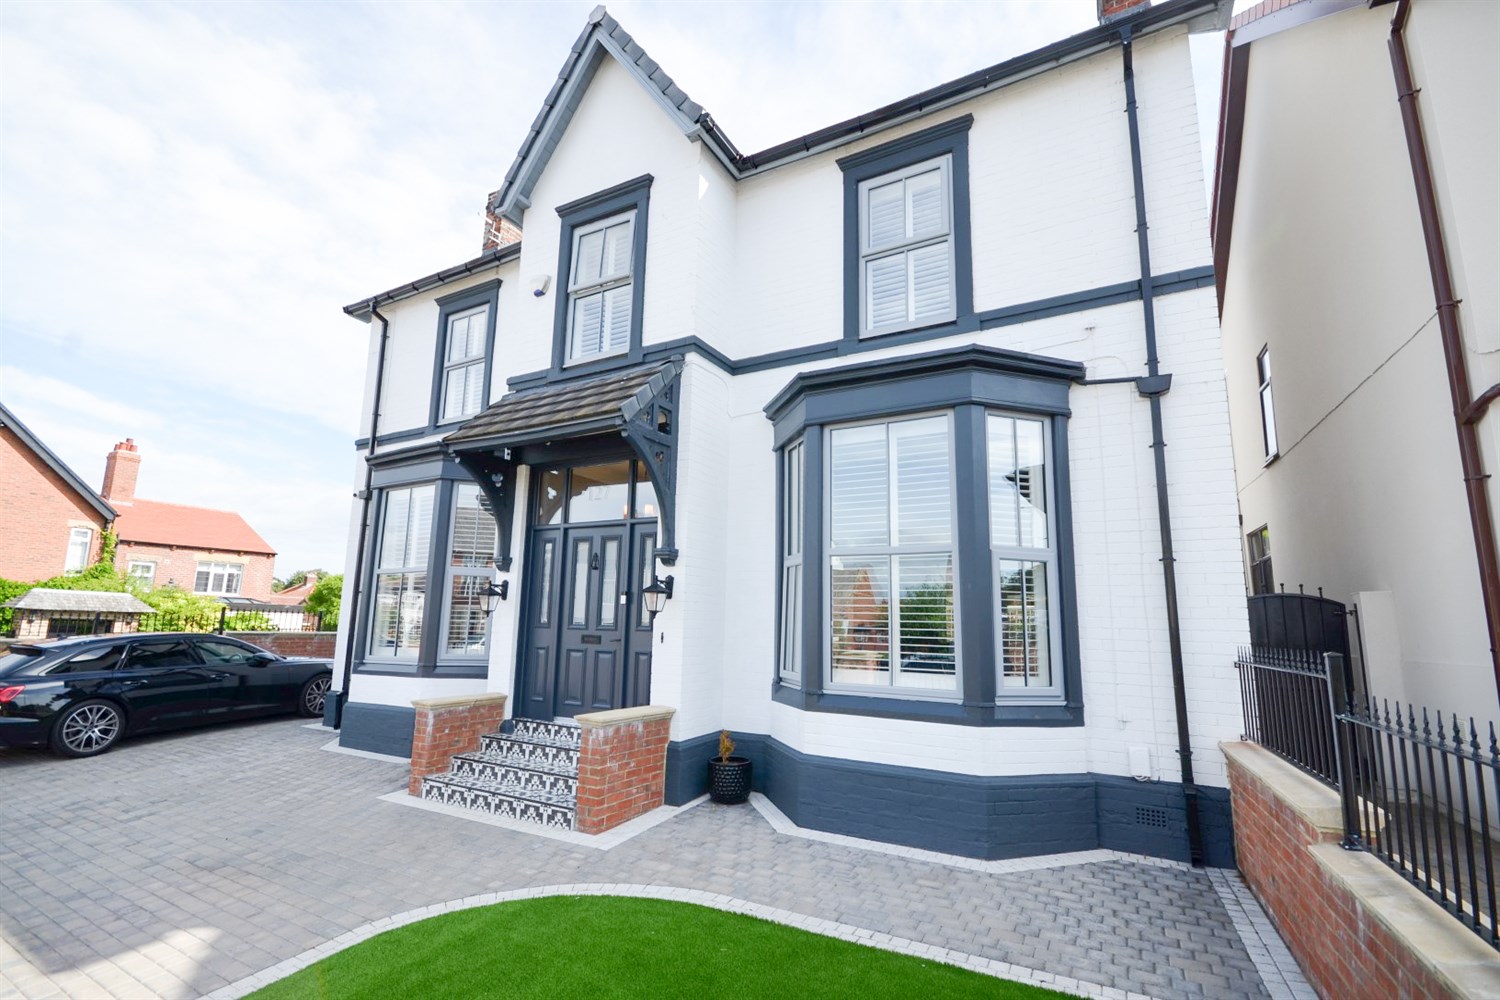 4 bed detached house for sale in Sunderland Road, South Shields - Property Image 1